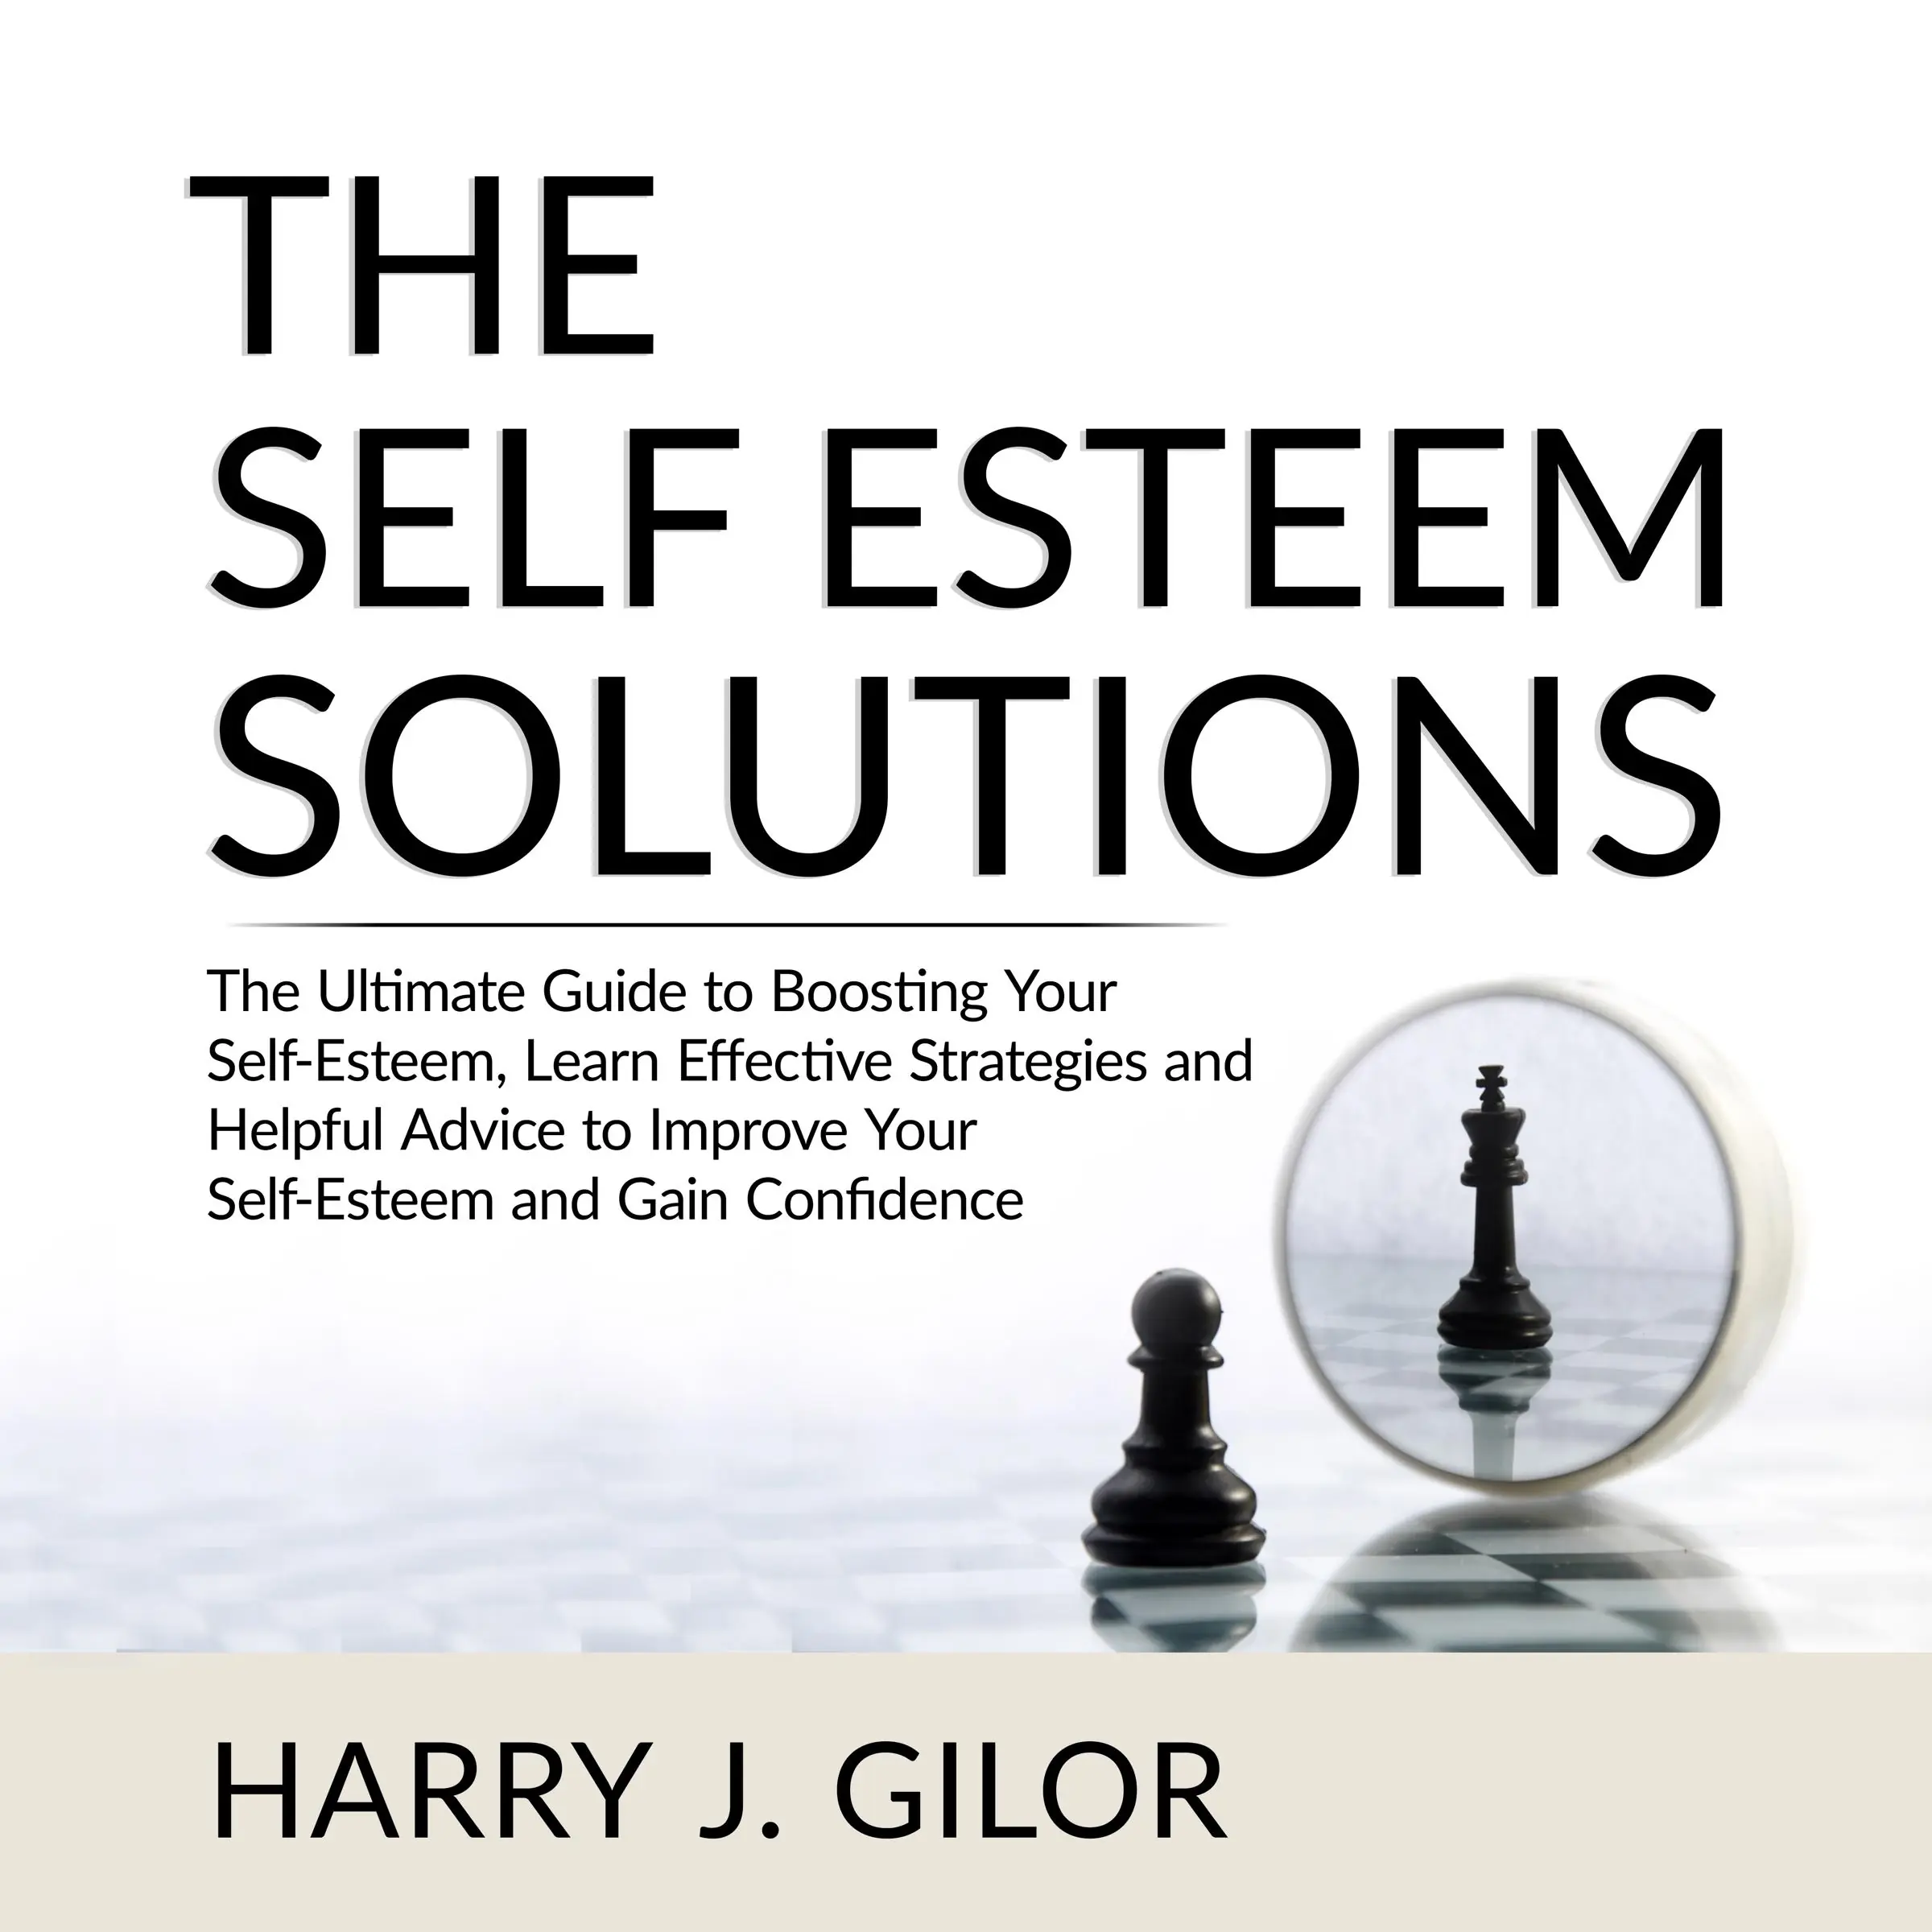 The Self Esteem Solutions: The Ultimate Guide to Boosting Your Self-Esteem, Learn Effective Strategies and Helpful Advice to Improve Your Self-Esteem and Gain Confidence Audiobook by Harry J. Gilor